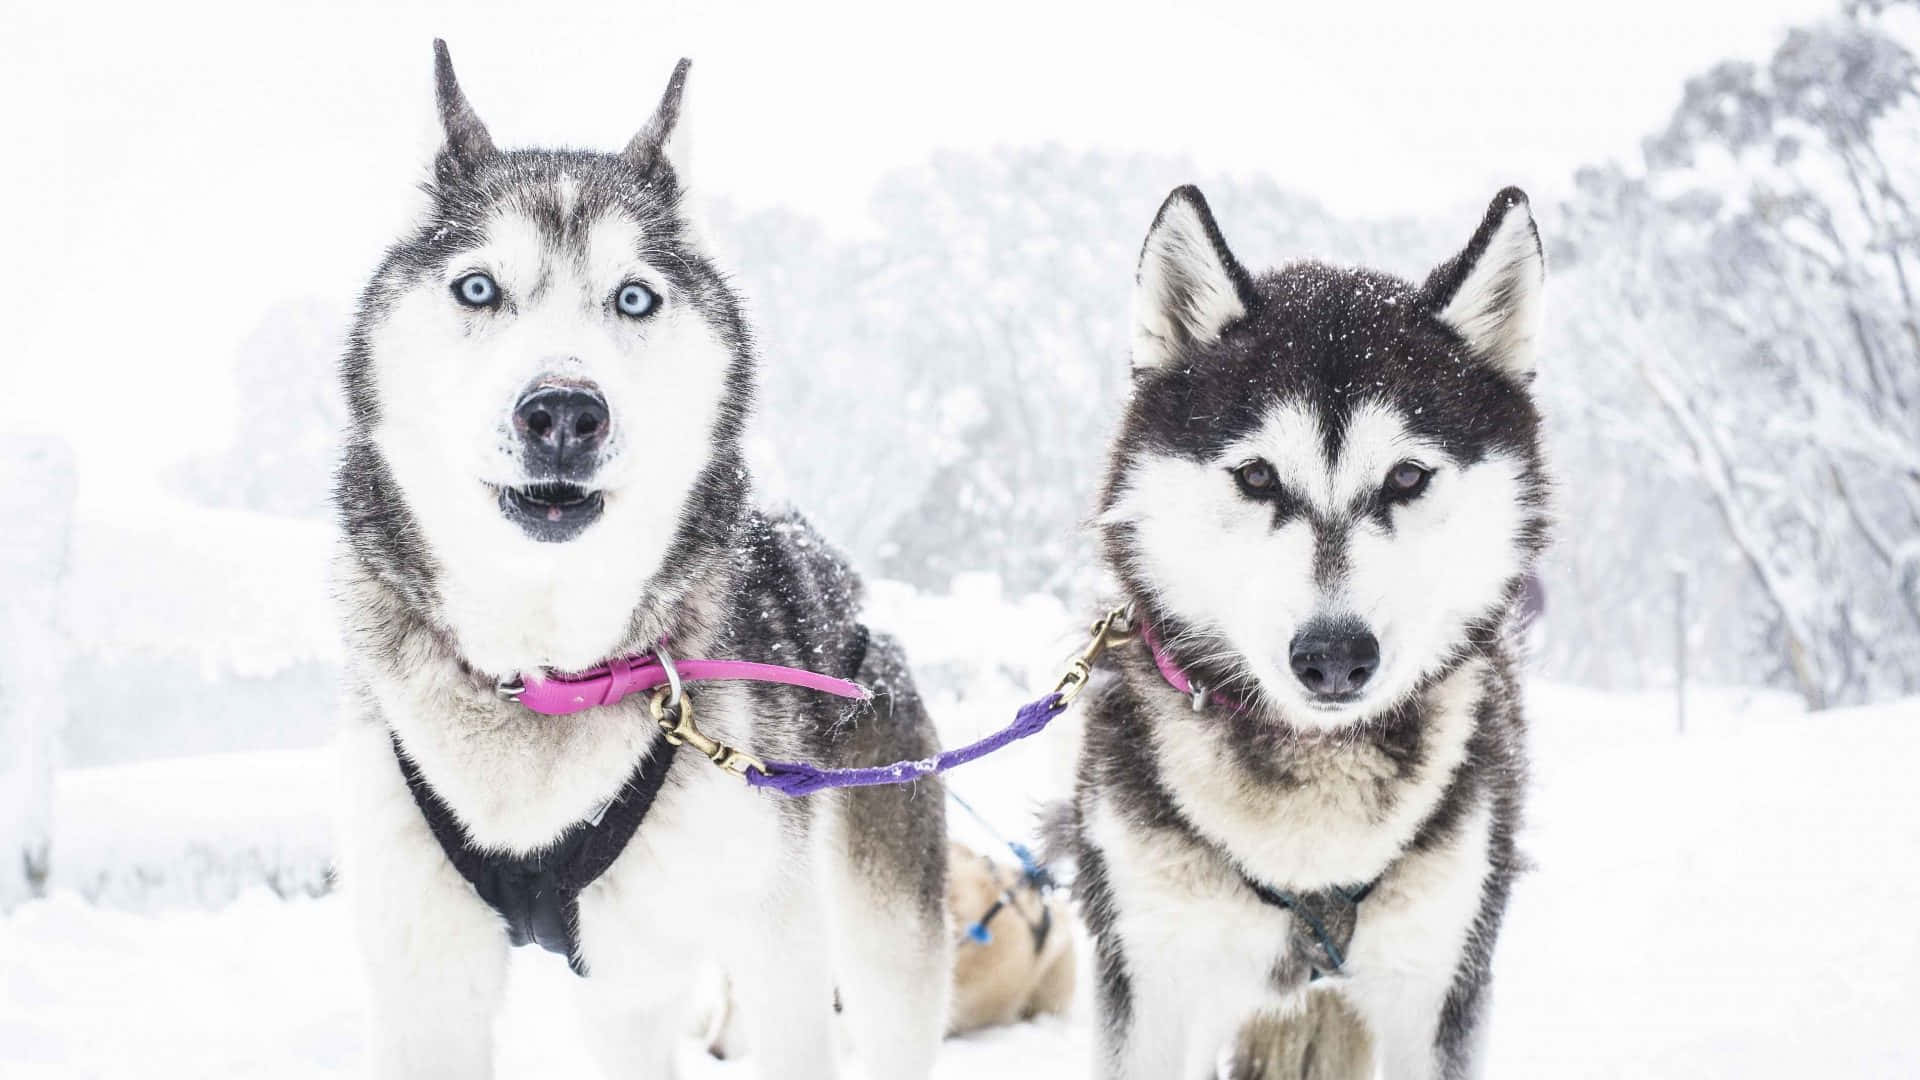 Exciting Journey Through The Snow - Sled Dogs In Action Wallpaper